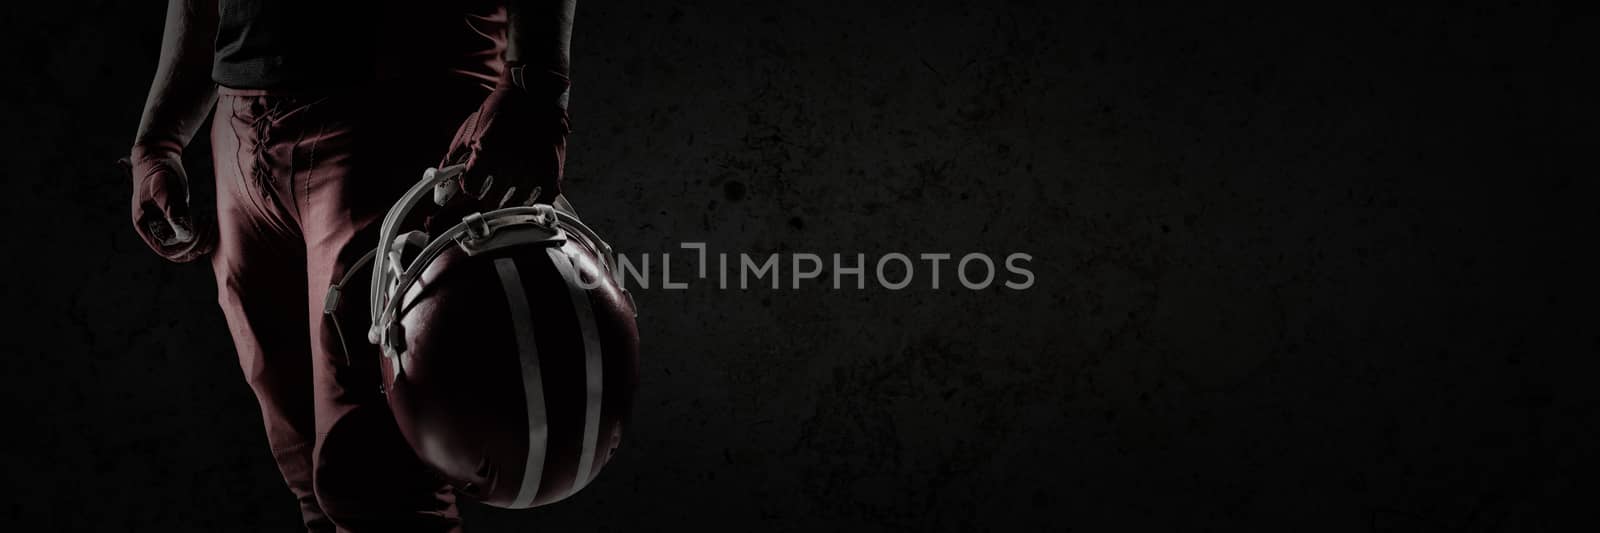 Composite image of volleyball player holding rugby helmet by Wavebreakmedia